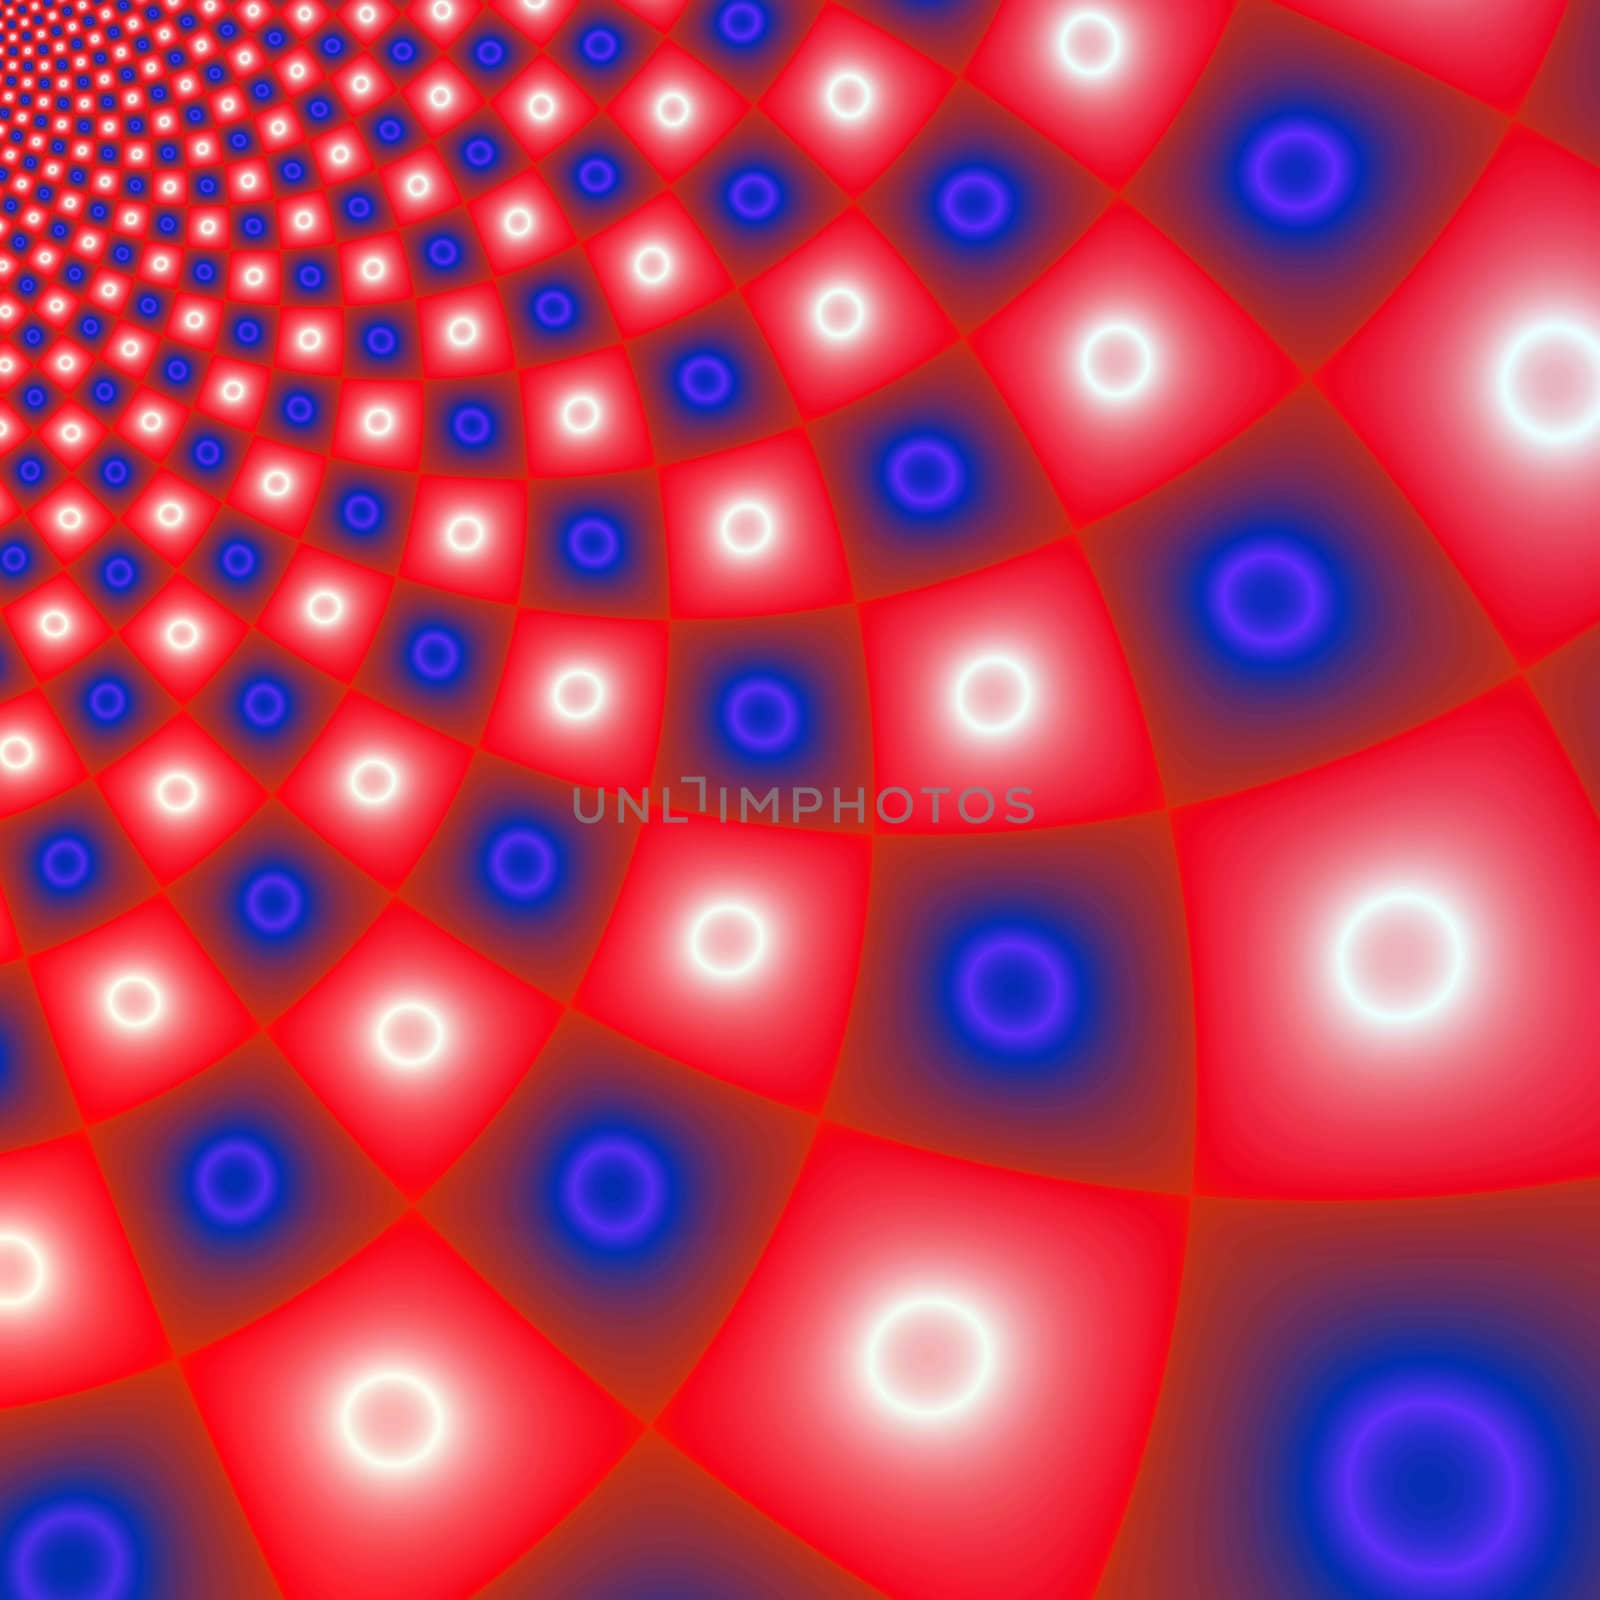 Abstract red & blue fractal background by klinok